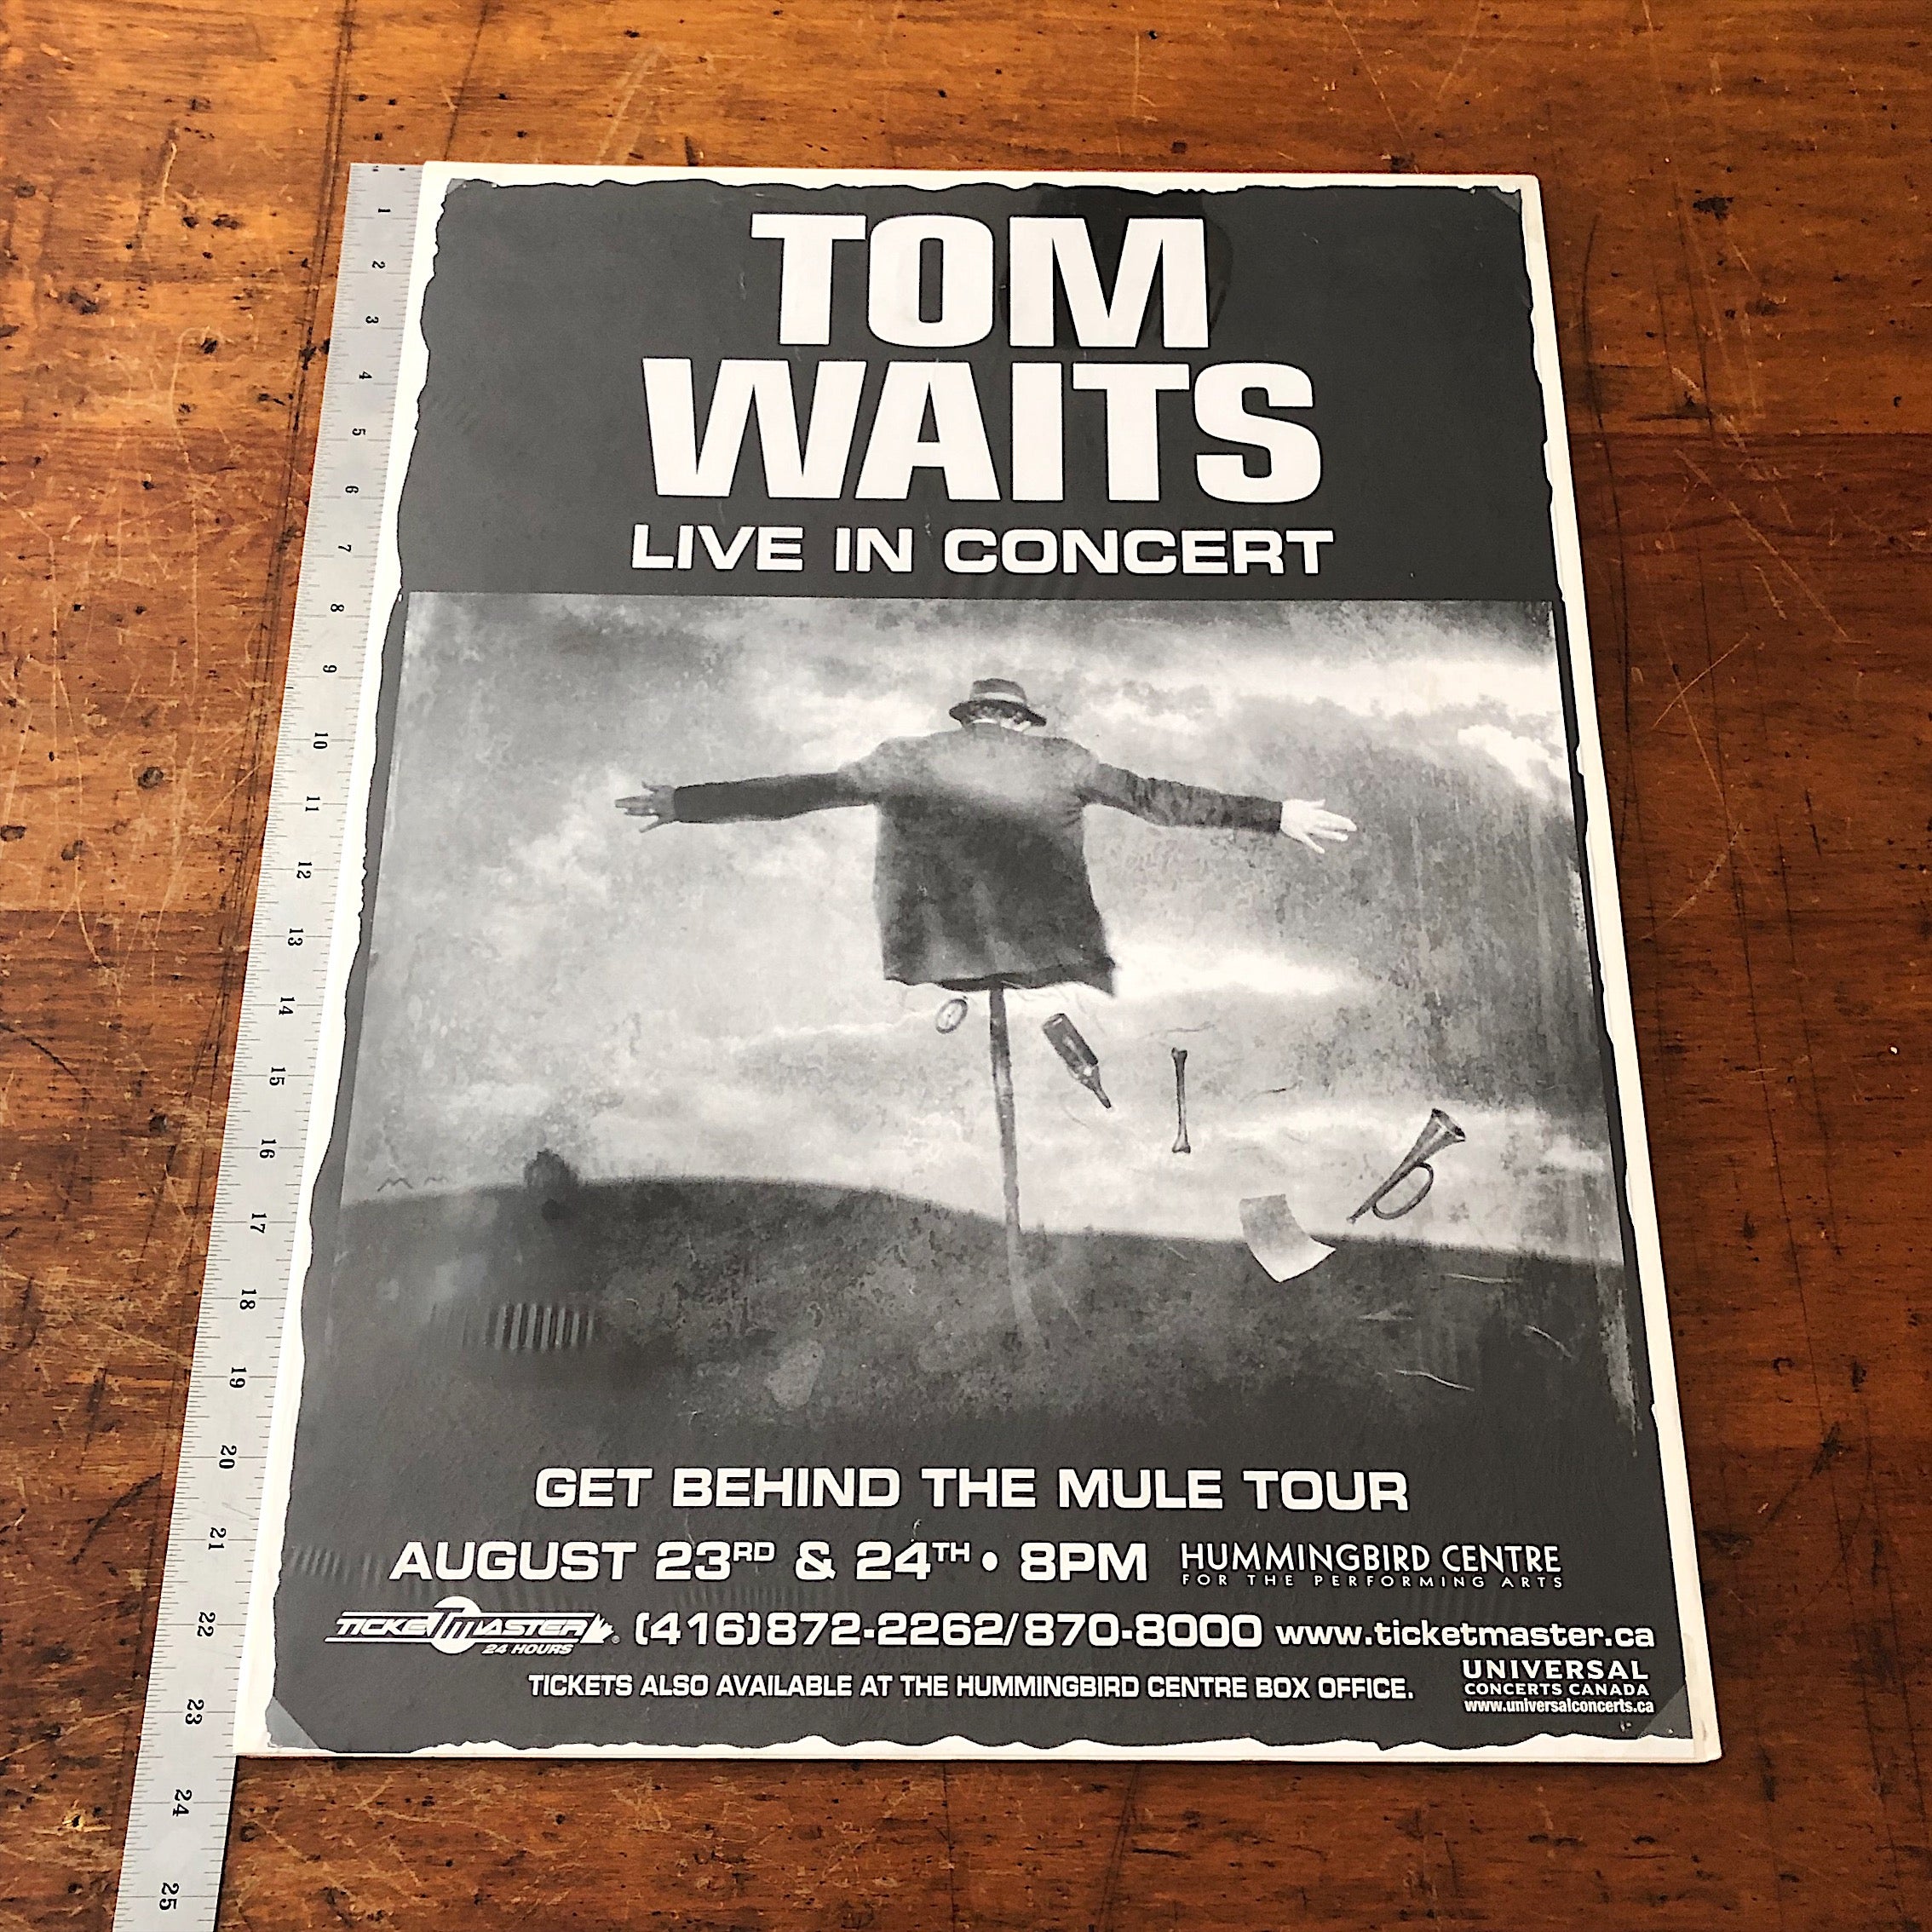 Tom Waits Concert Poster from 1999 - Get Behind the Mule Tour - Toronto Canada Shows - Rock Memorabilia 